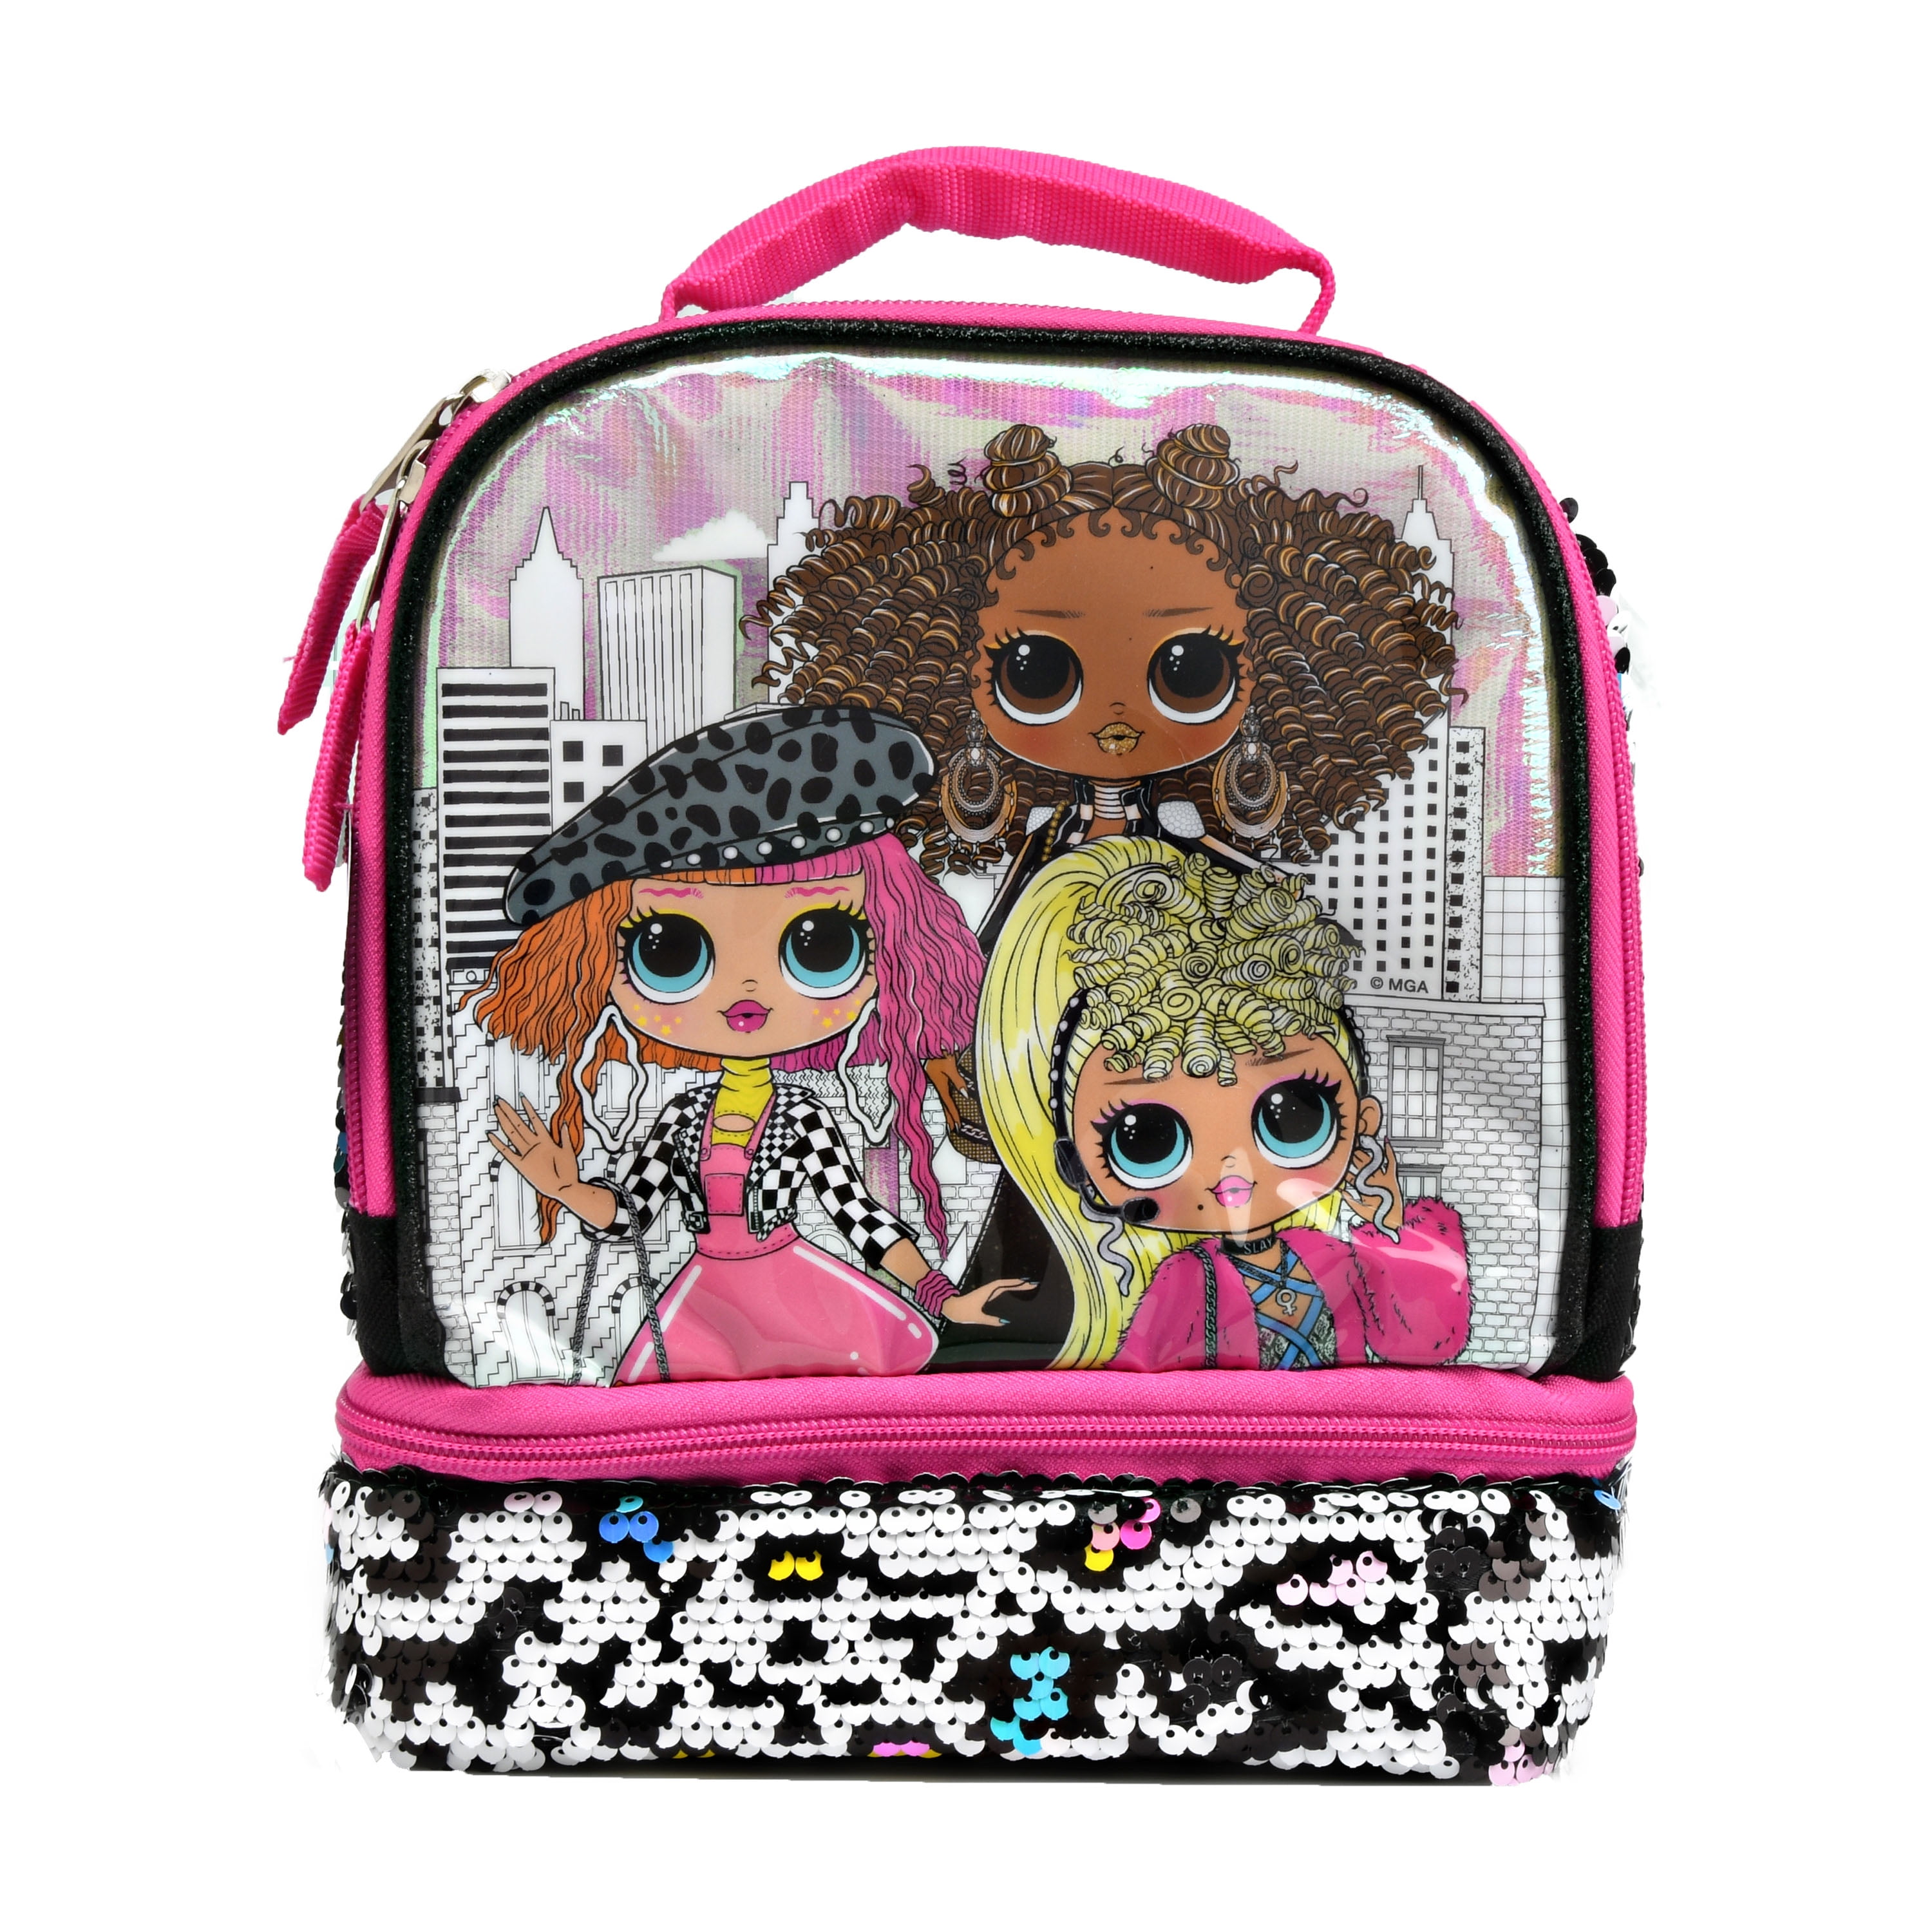 L.O.L Surprise Little Girls LOL School Insulated Lunch Bag Pink Toddler Gift 